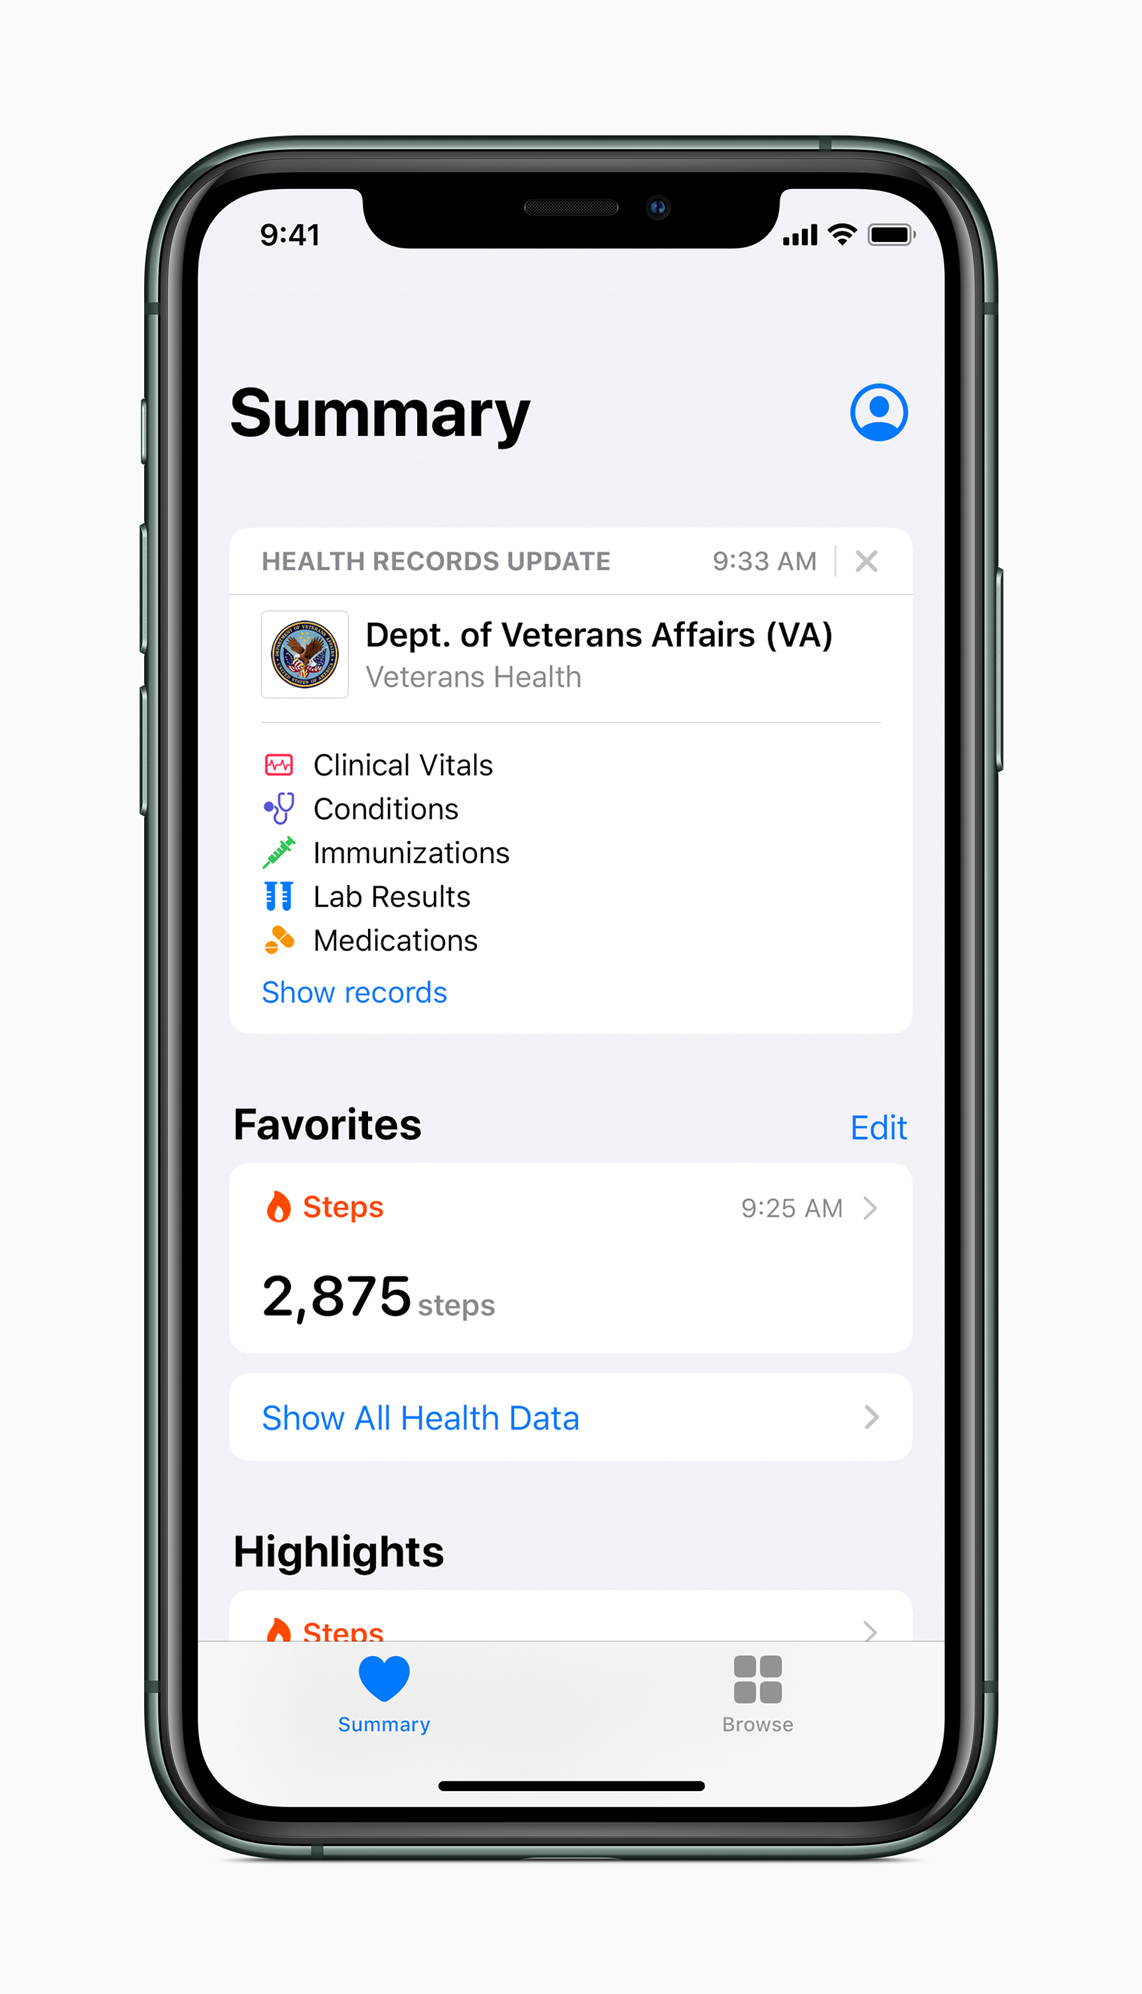 Health Records on iPhone now available to veterans across the US